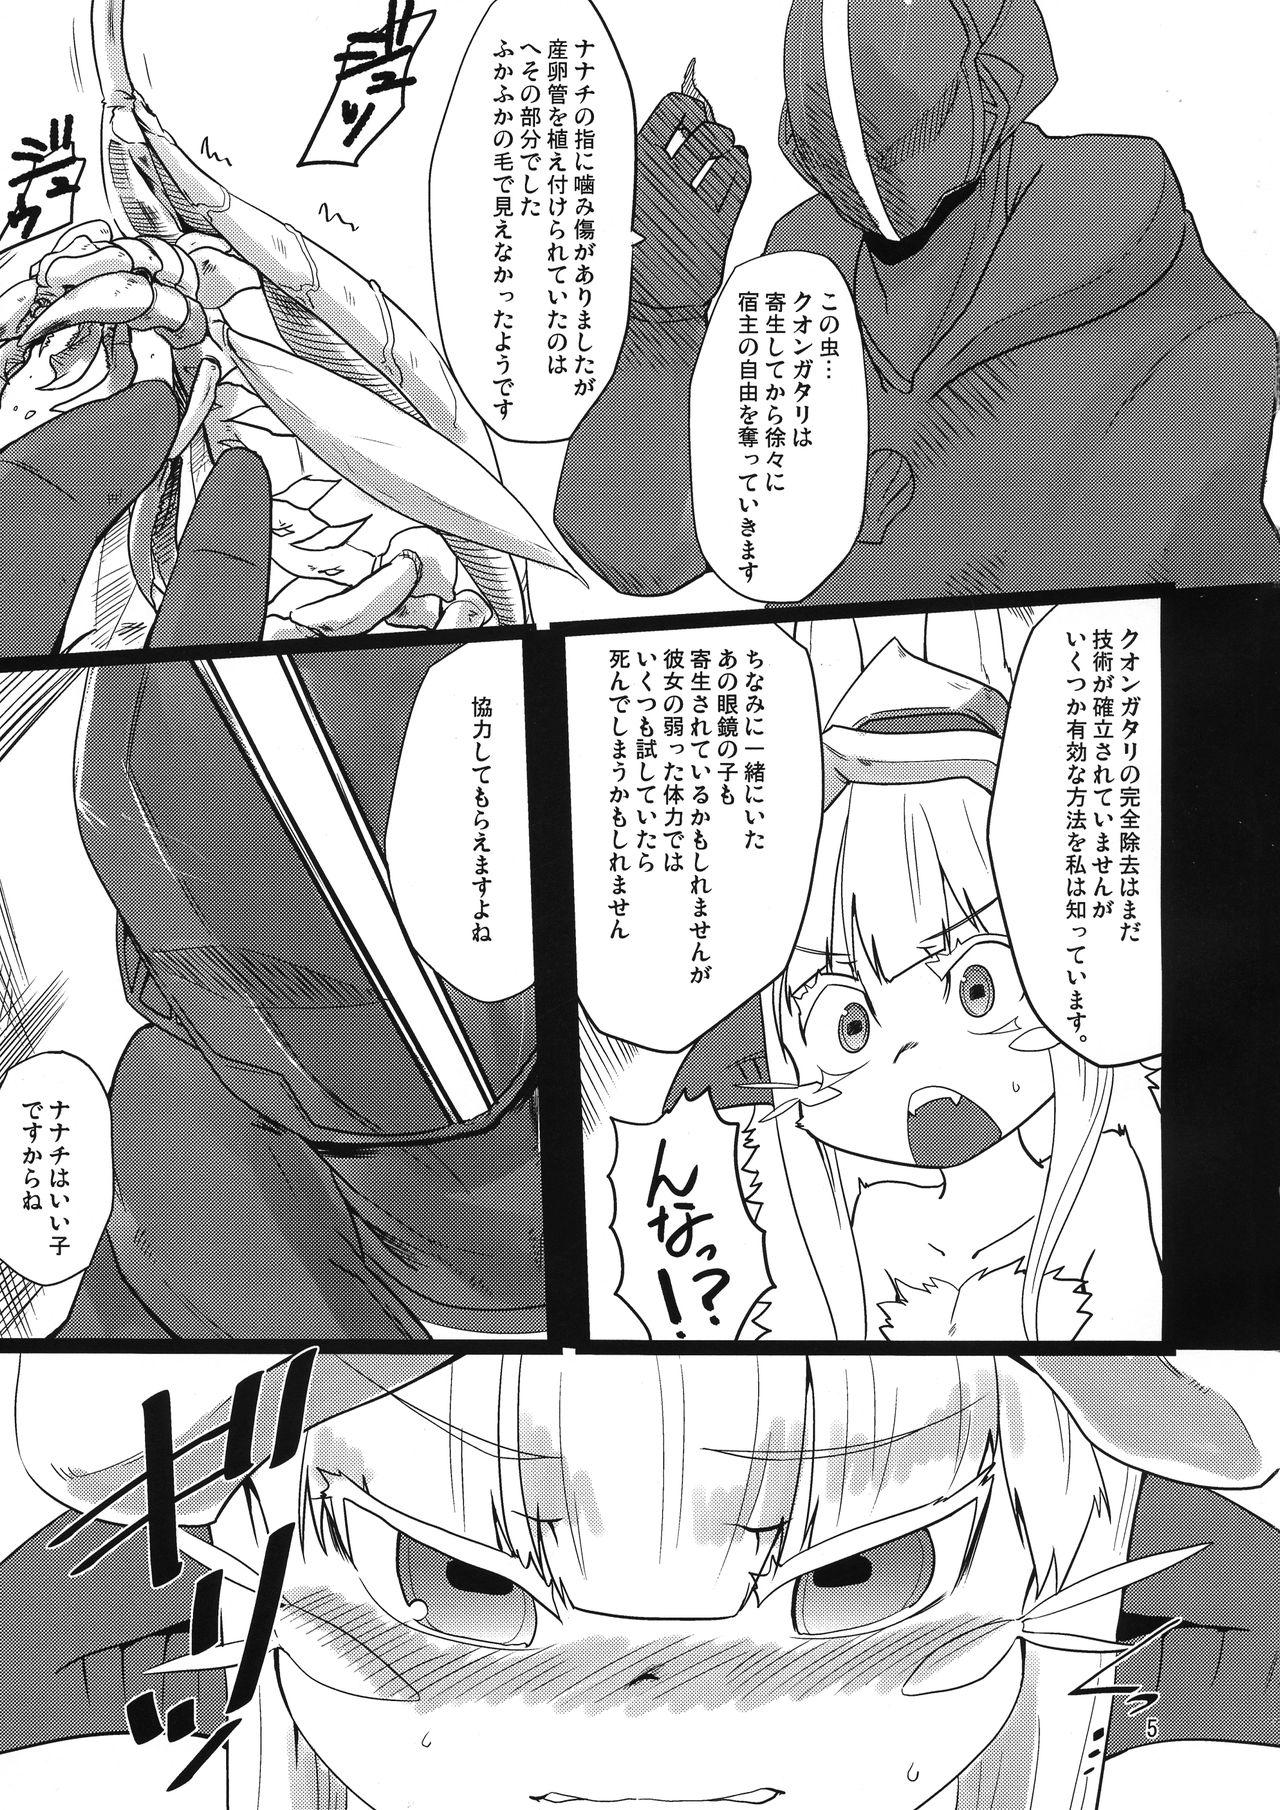 Exhib Made in Nanachi - Made in abyss Para - Page 5